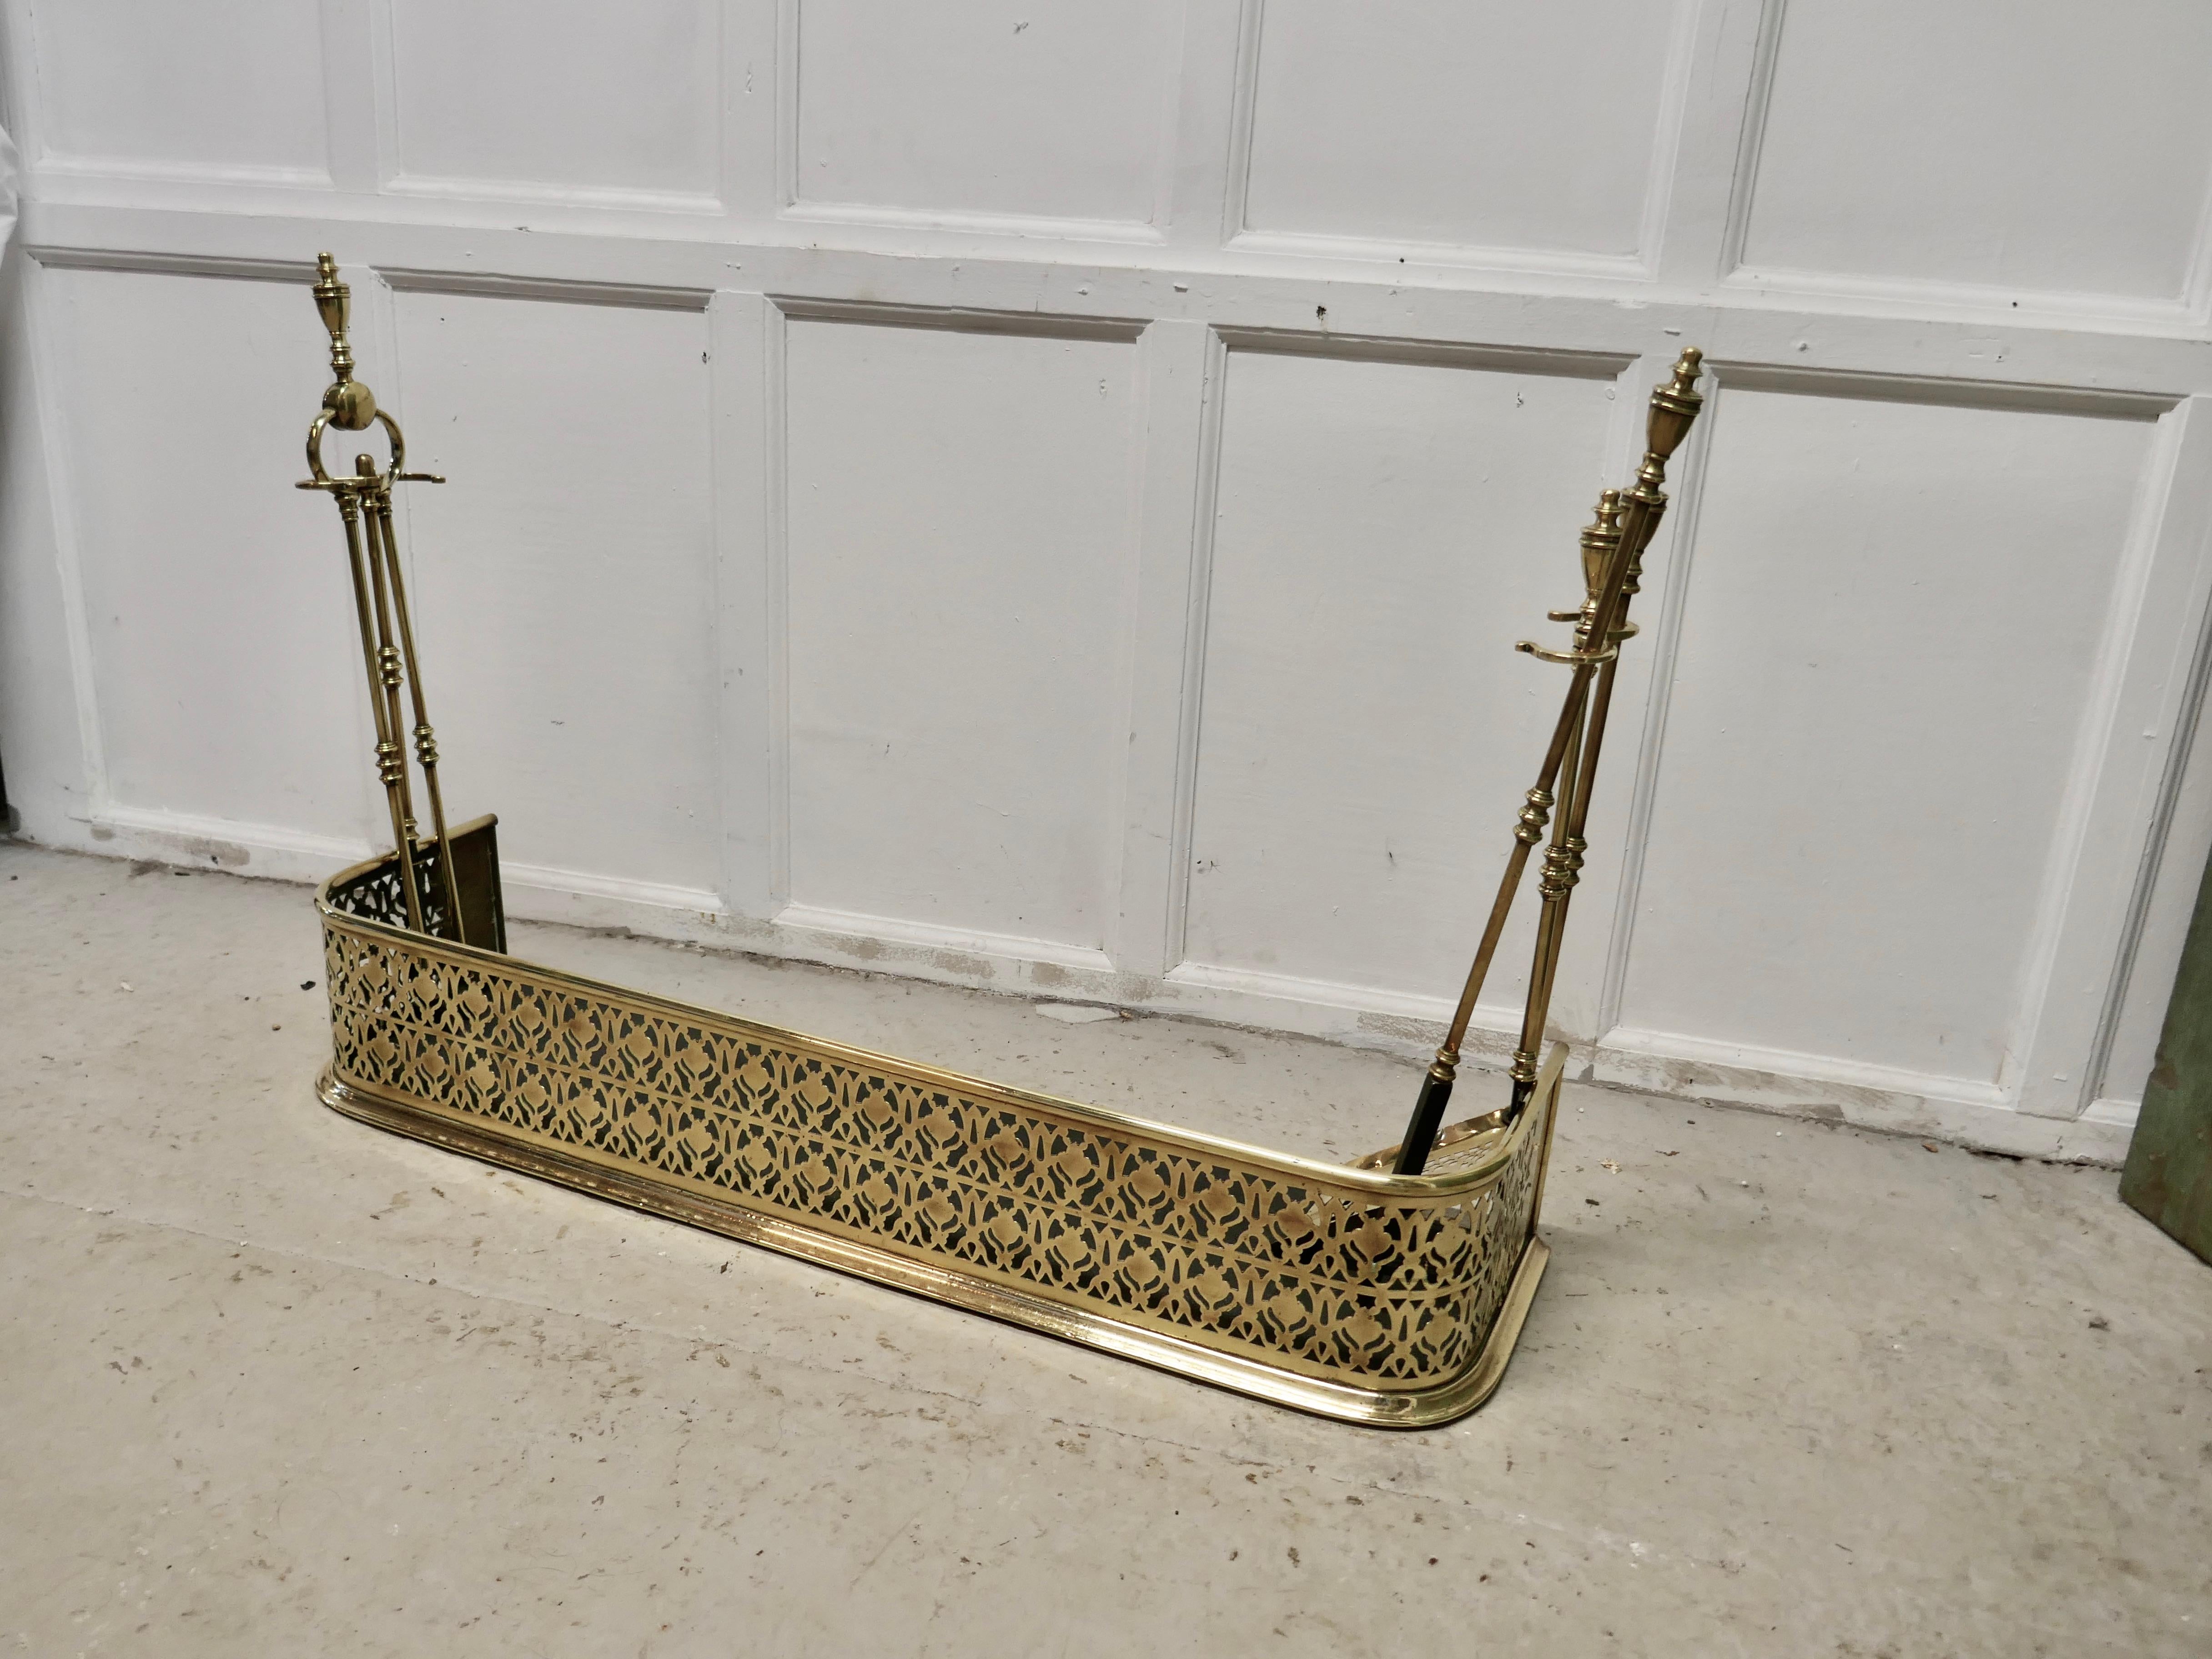 Victorian pierced brass fender with fire irons

This is a Victorian pierced brass fender, on either side it has a support to keep the fire irons or Companion set in place. The 3 Irons are original to the fender, you can see the turnings on the top